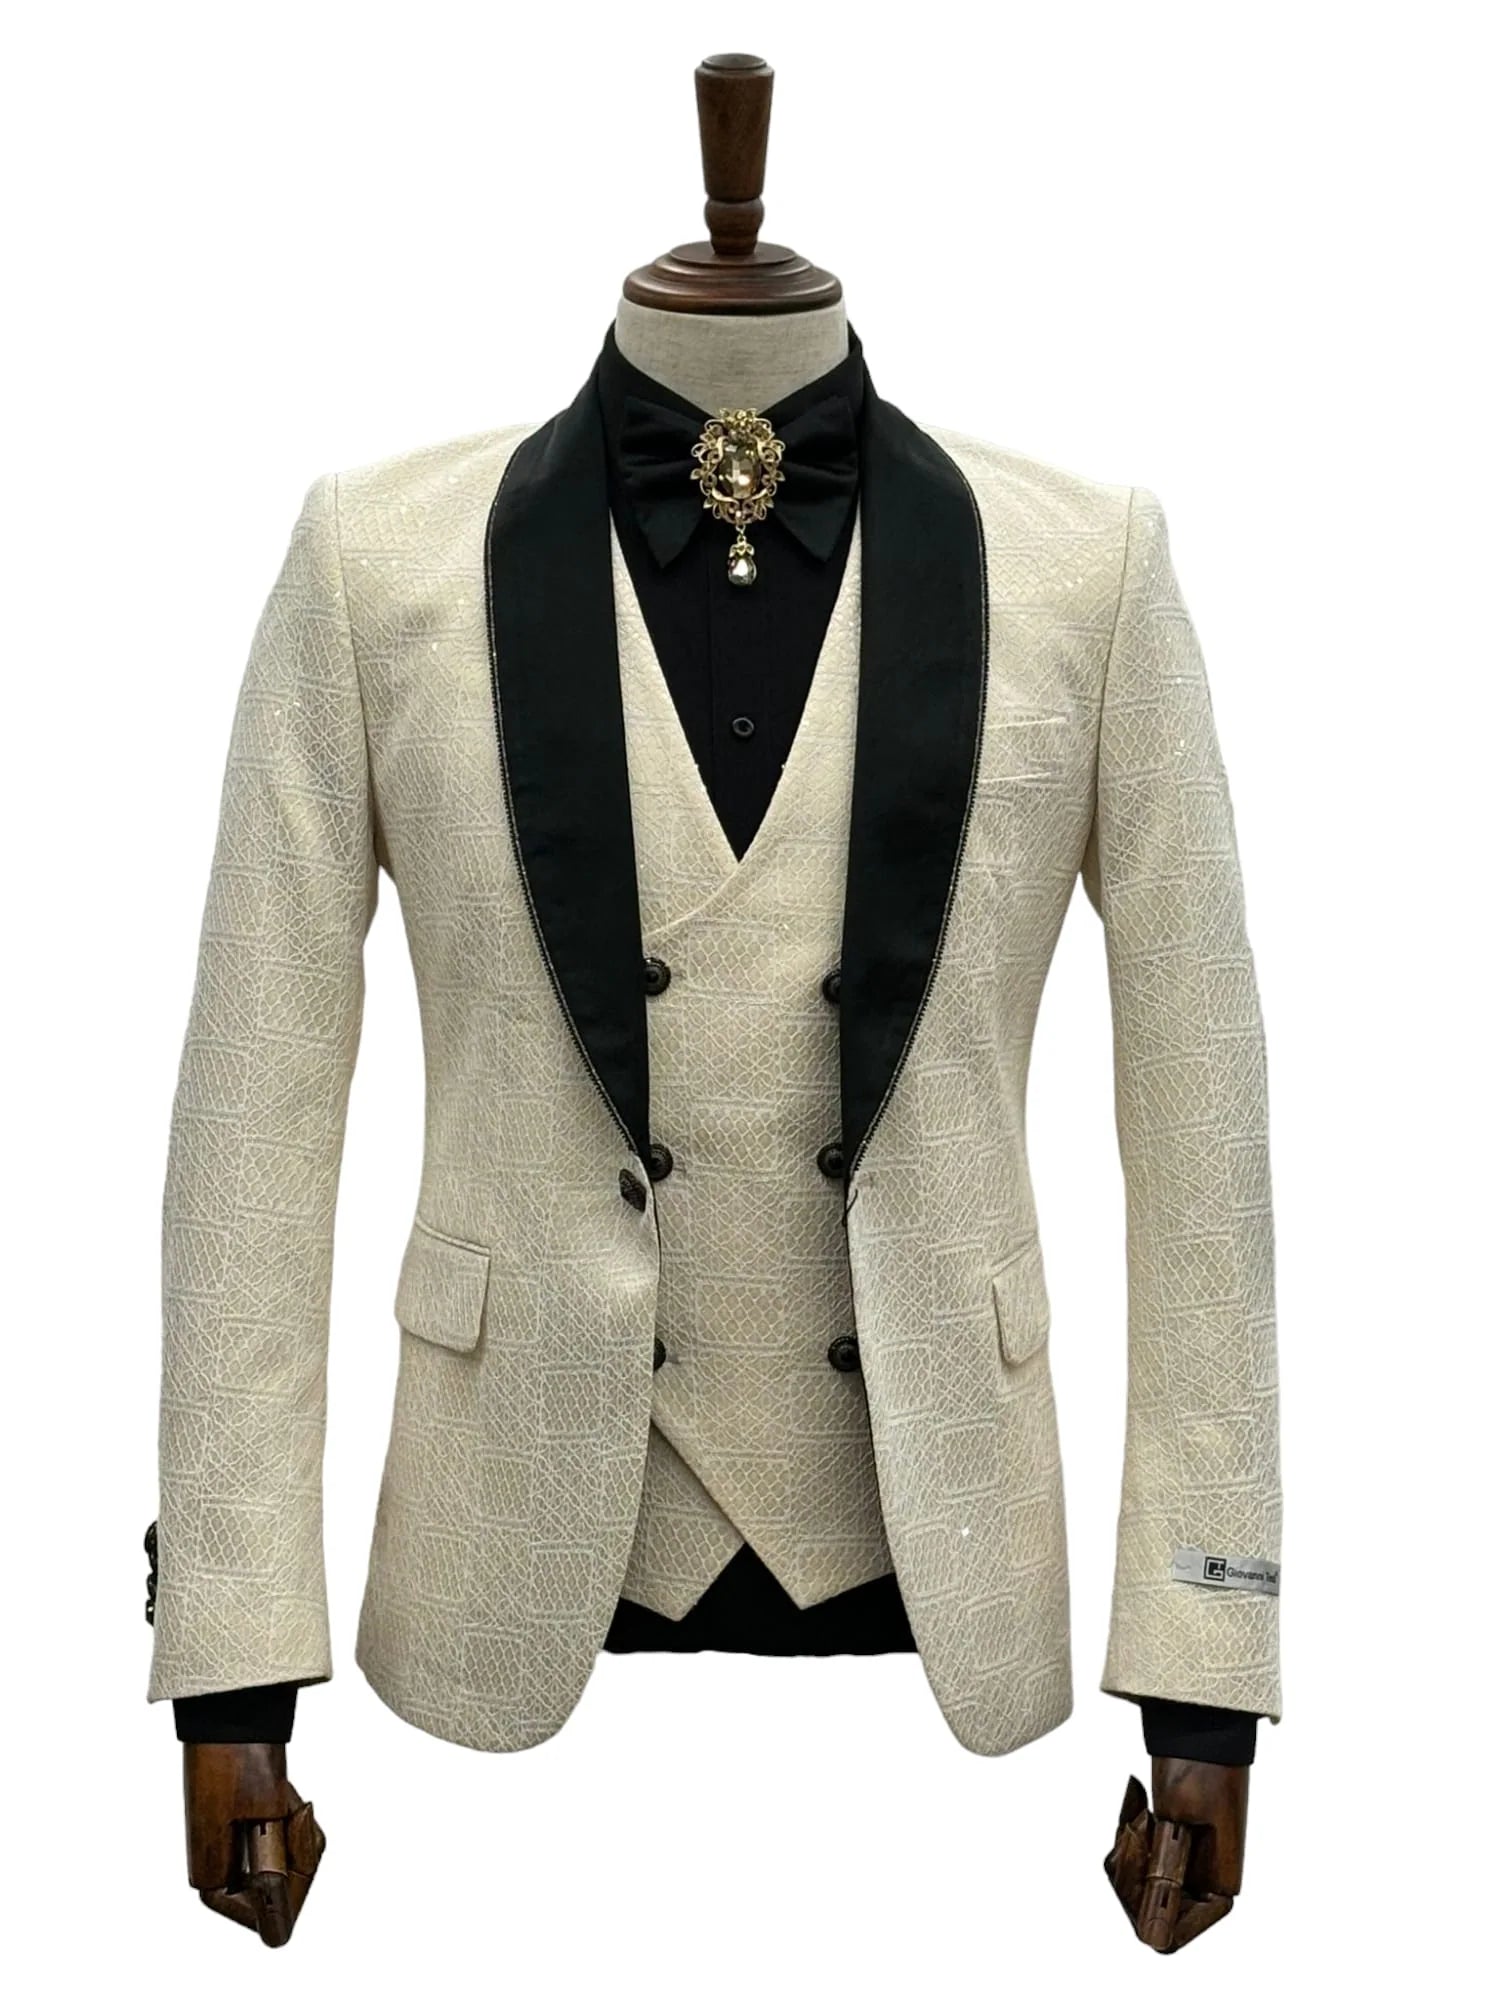 Ivory Luxe Tuxedo Set with brocade detail, embodying vintage elegance and sophistication."